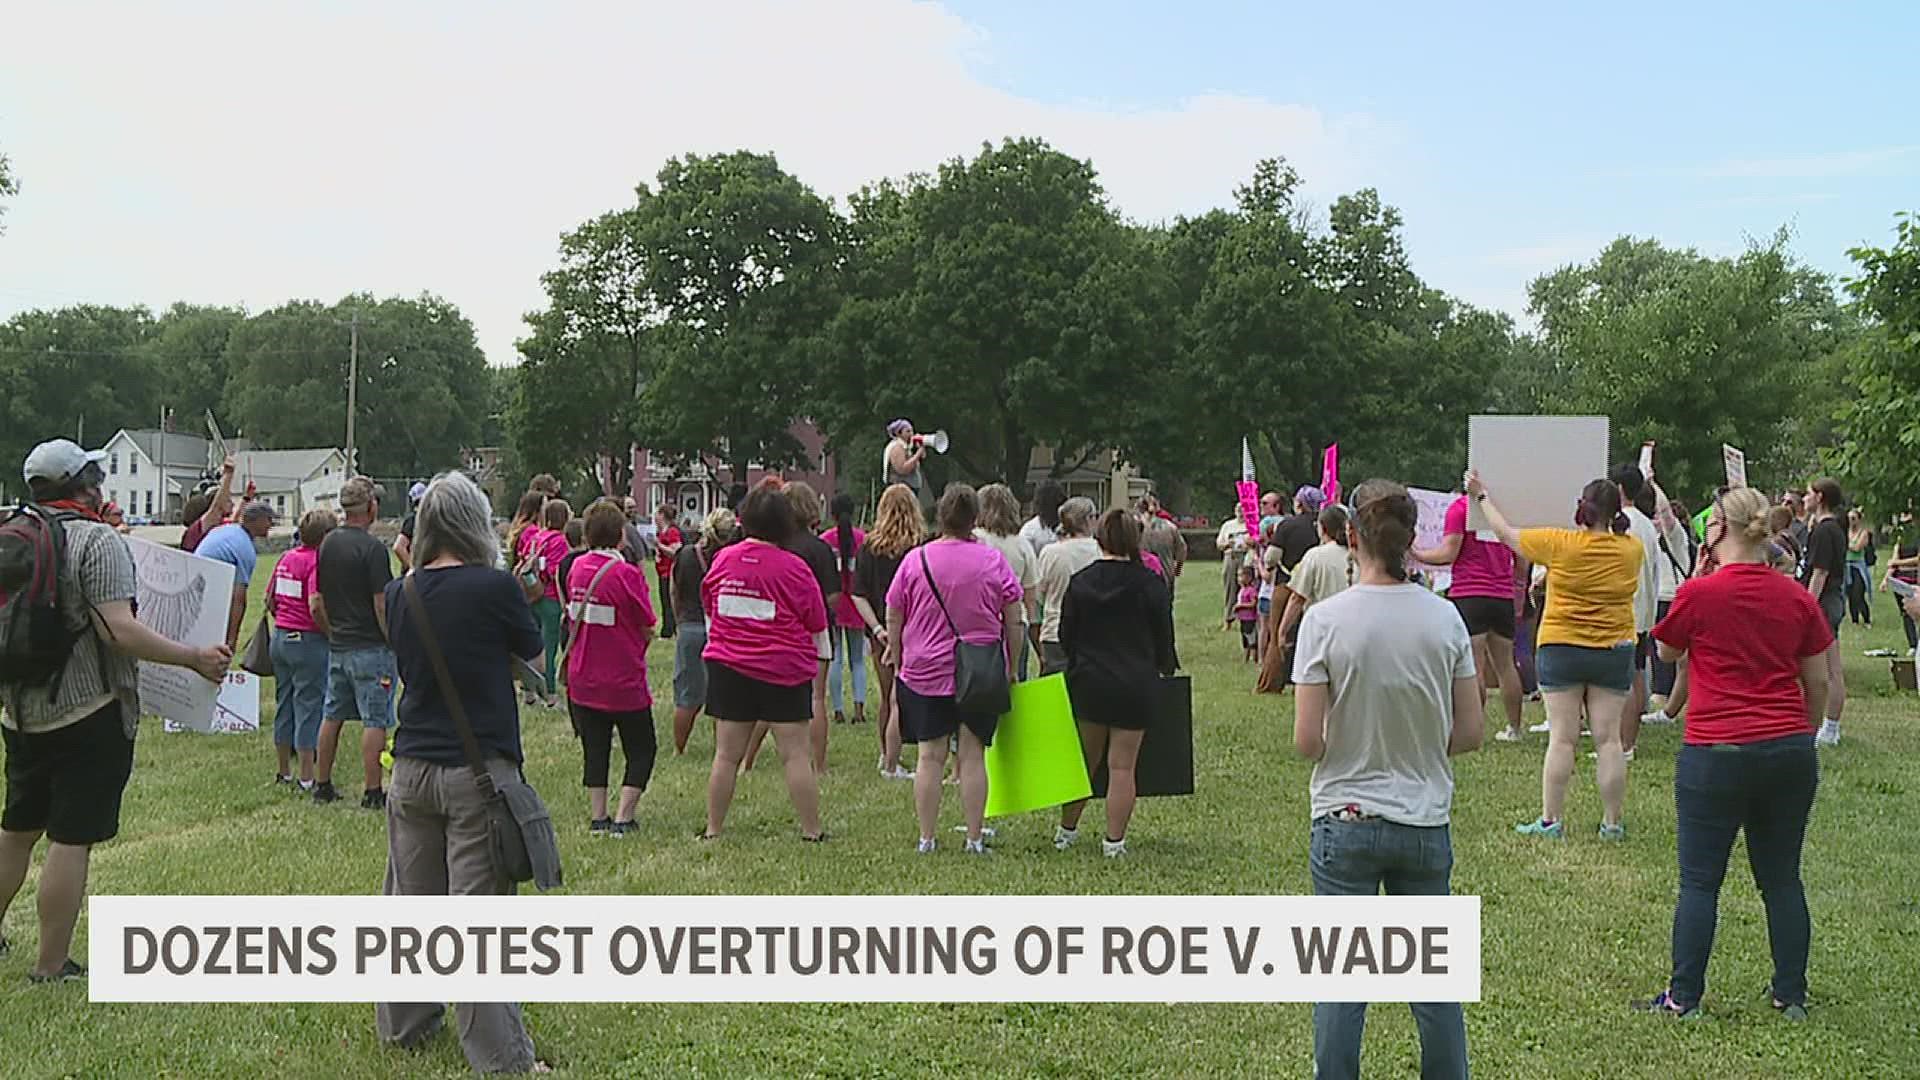 Around 100 people gathered in Layafette Park in Davenport Saturday afternoon carrying signs and speaking out against the Supreme Court's decision.